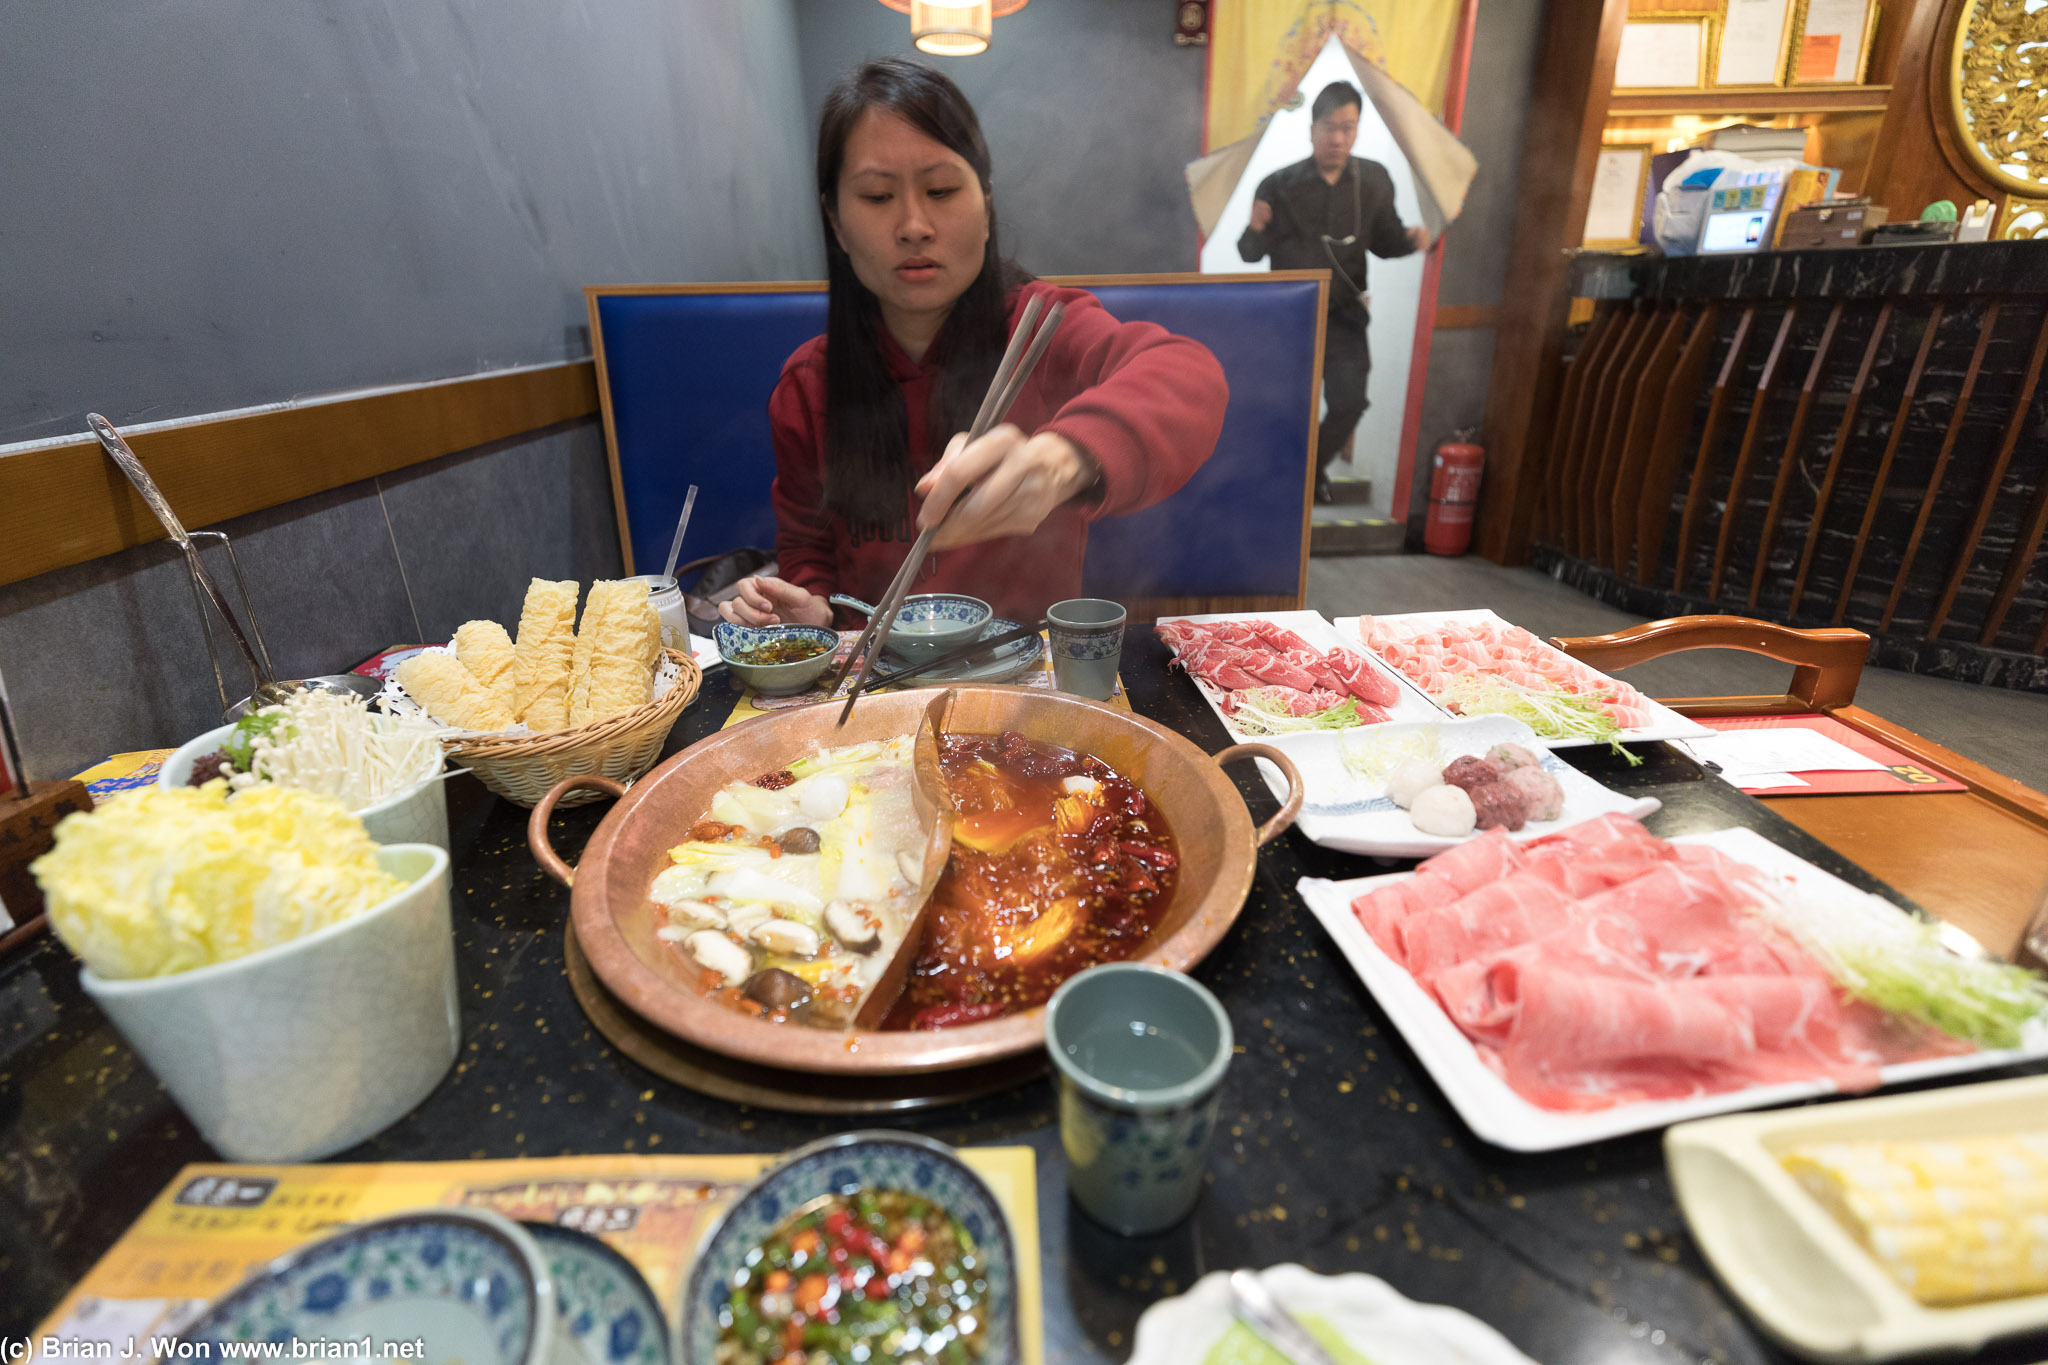 Petula and the spread at Cheng Du Old Pier Hot Pot.